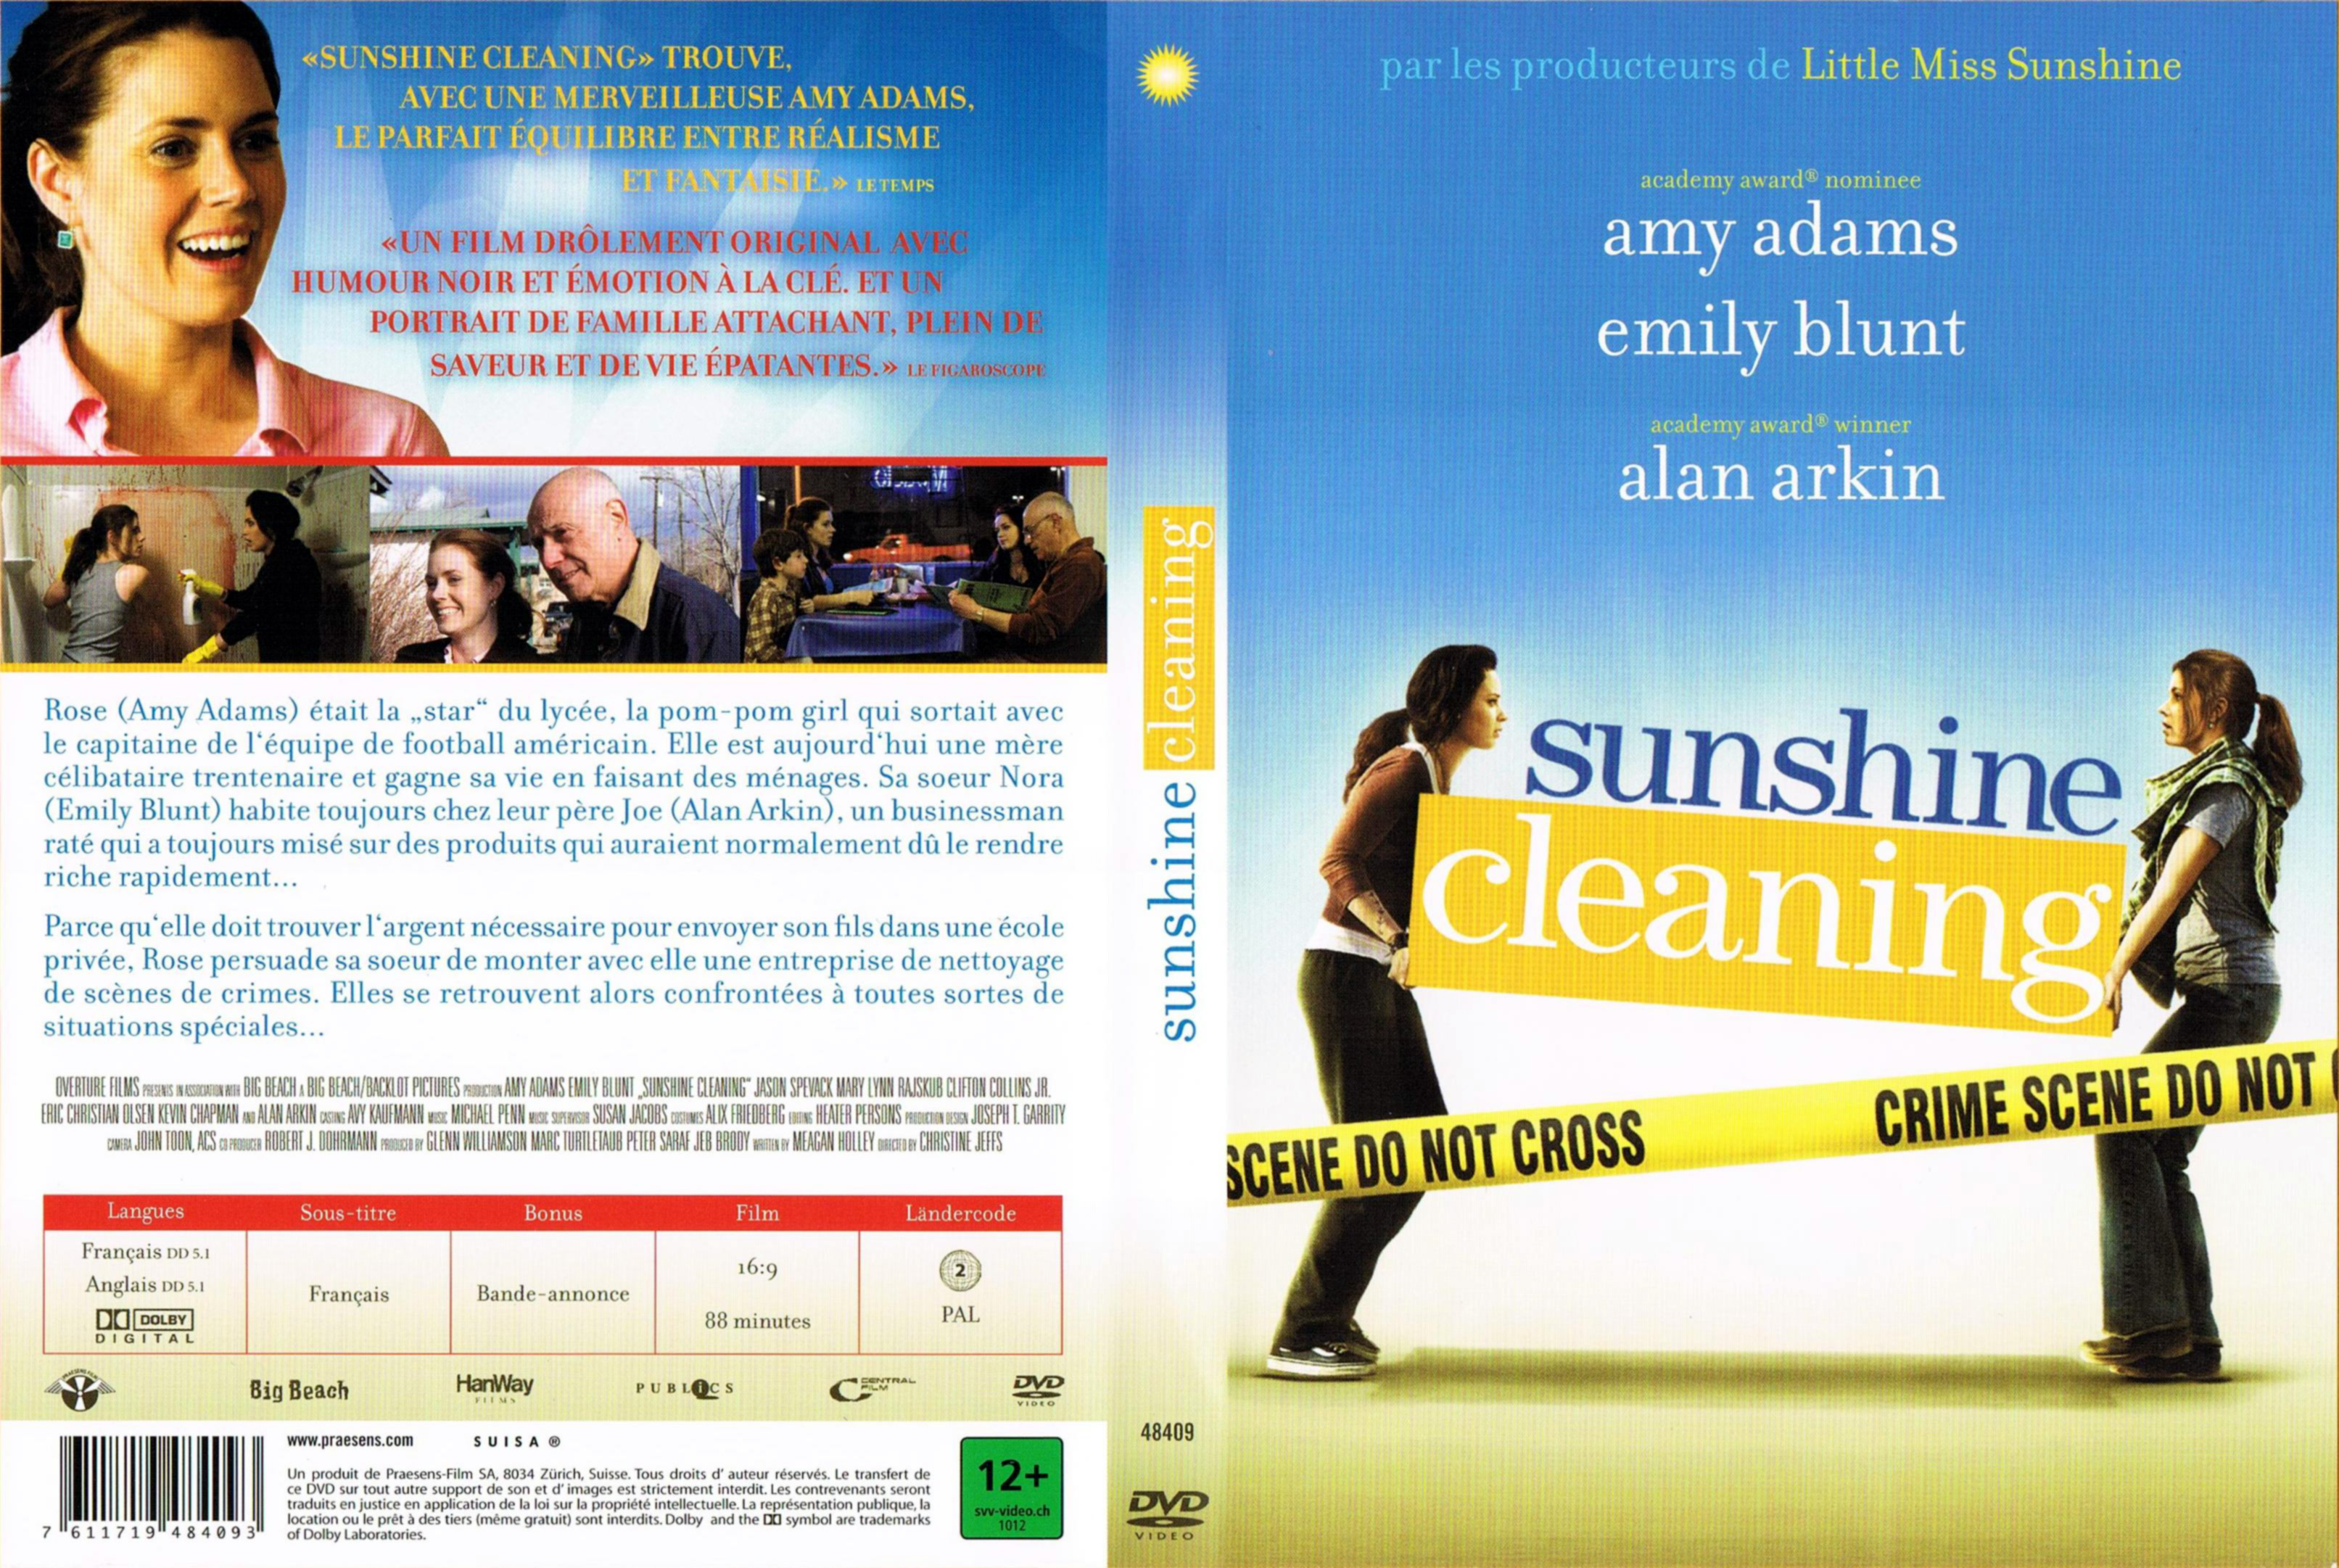 Jaquette DVD Sunshine cleaning